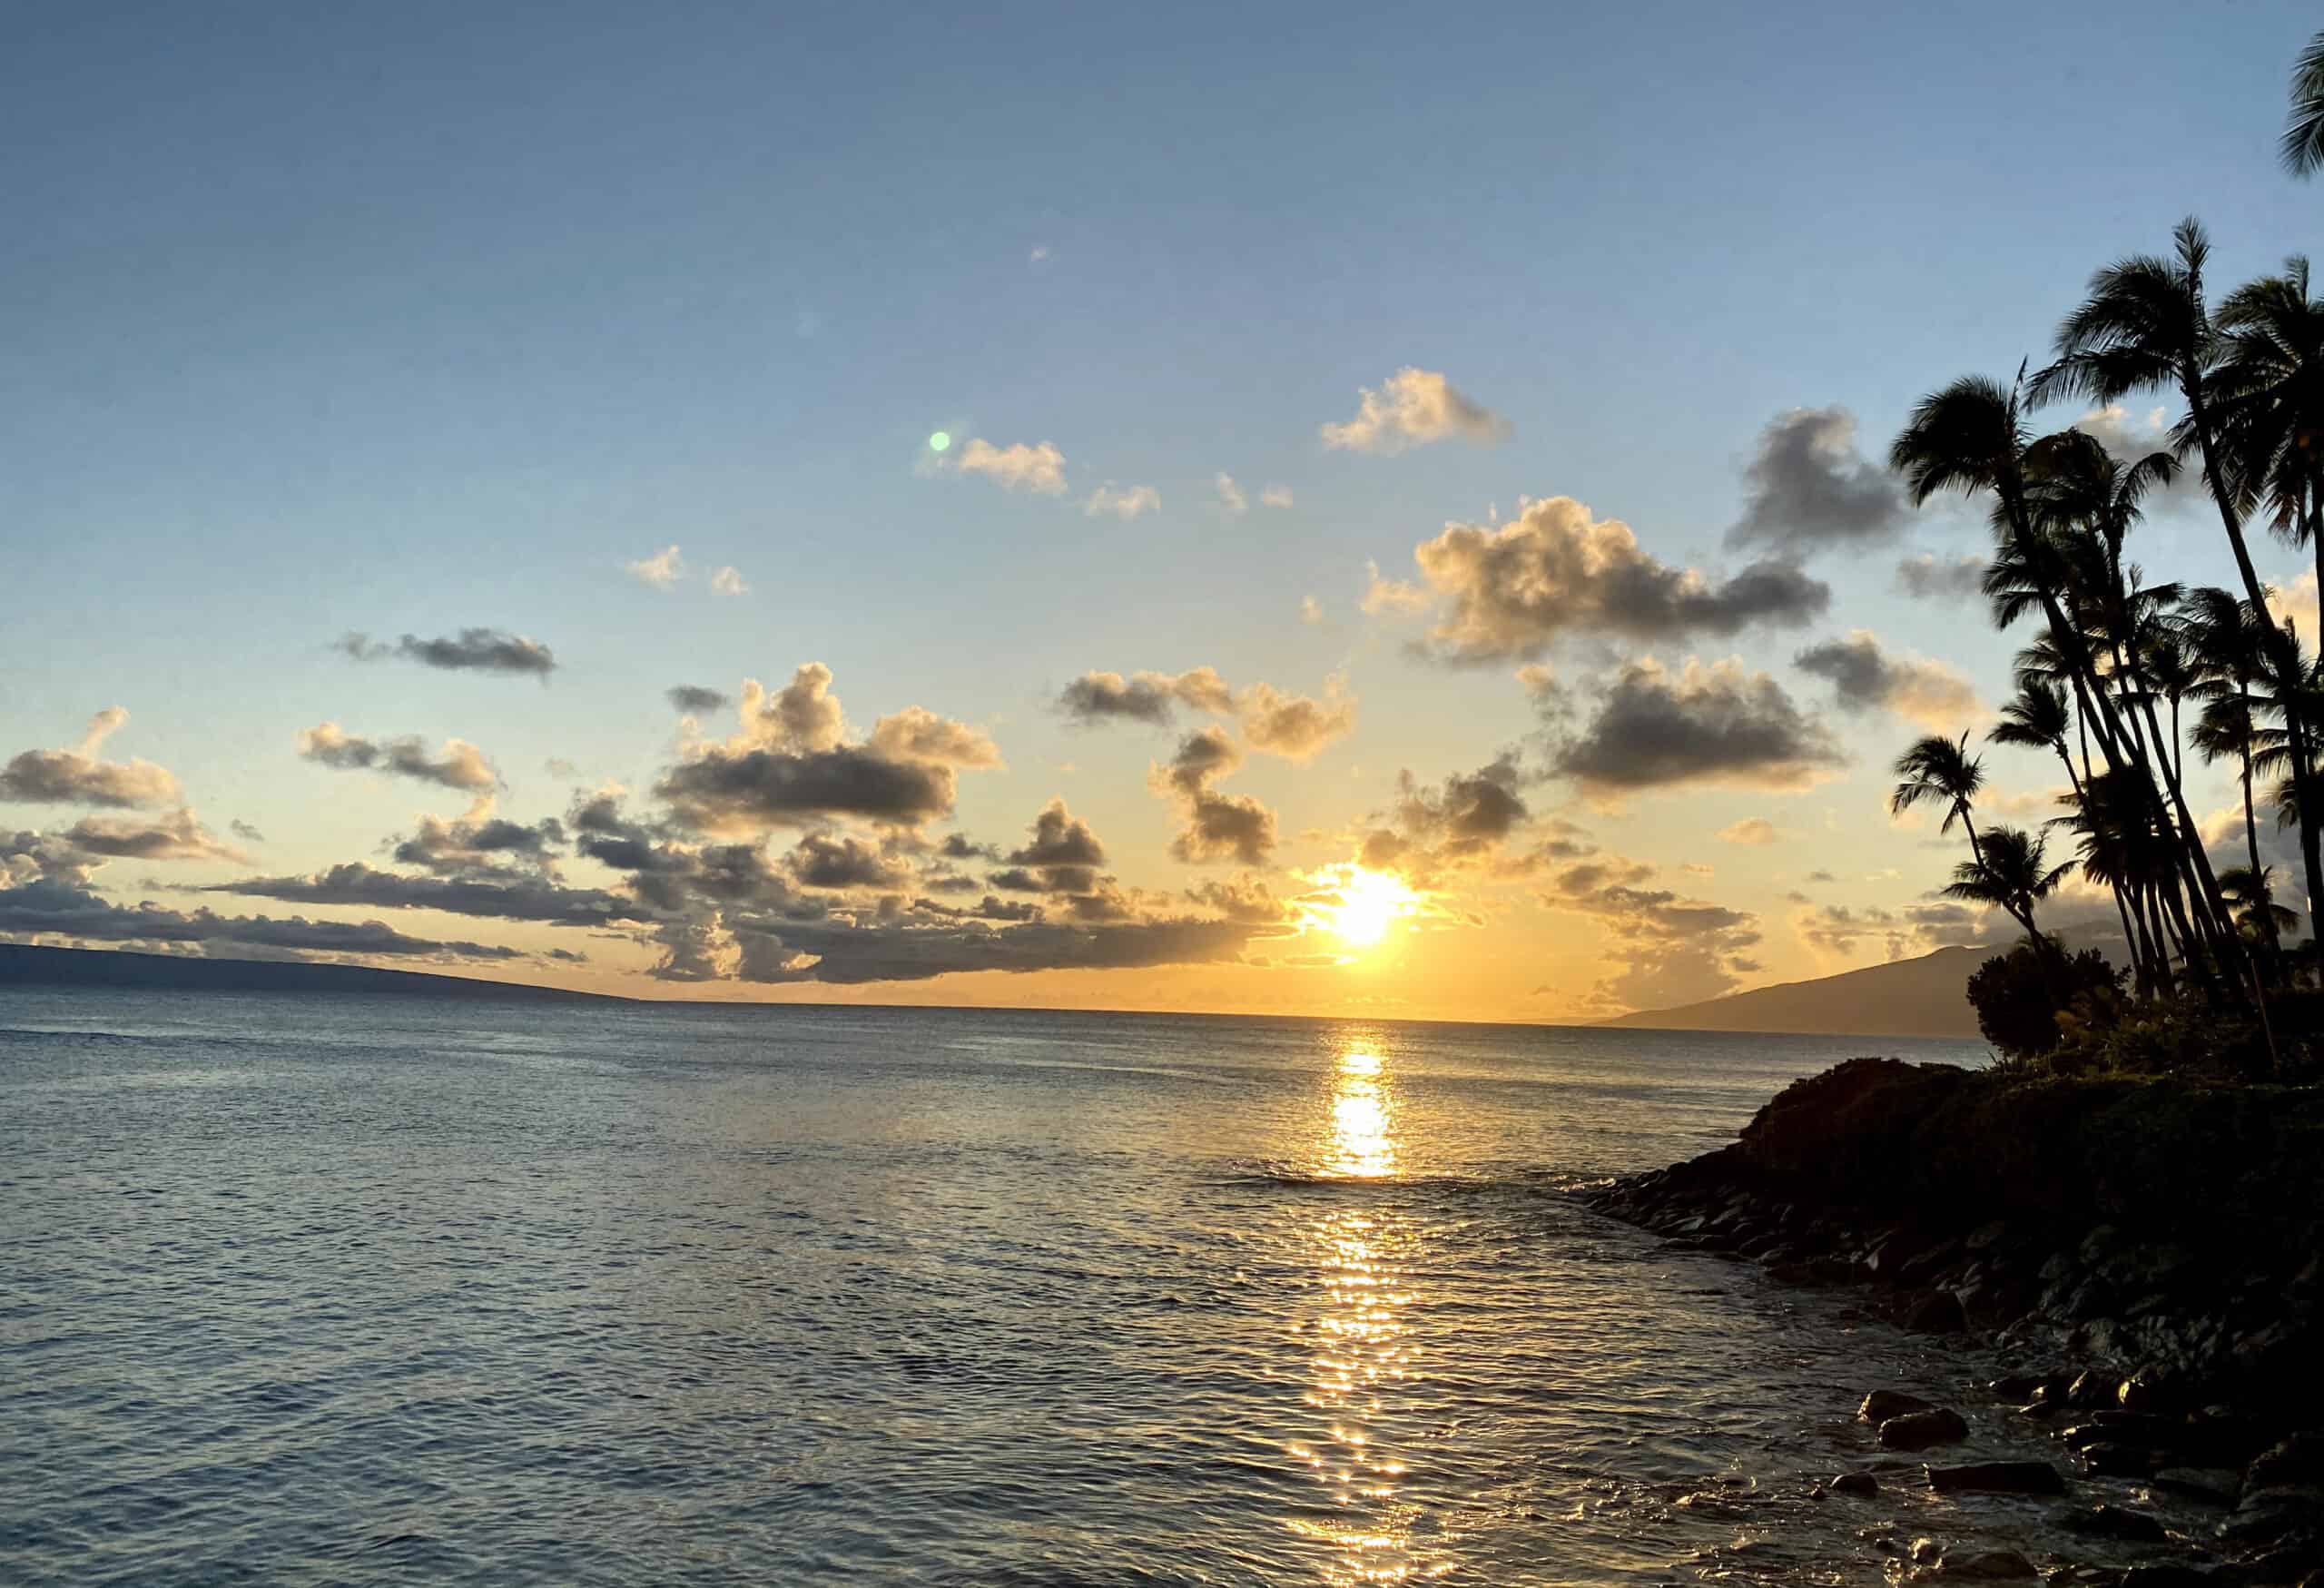 How to Safely Travel to Maui During COVID